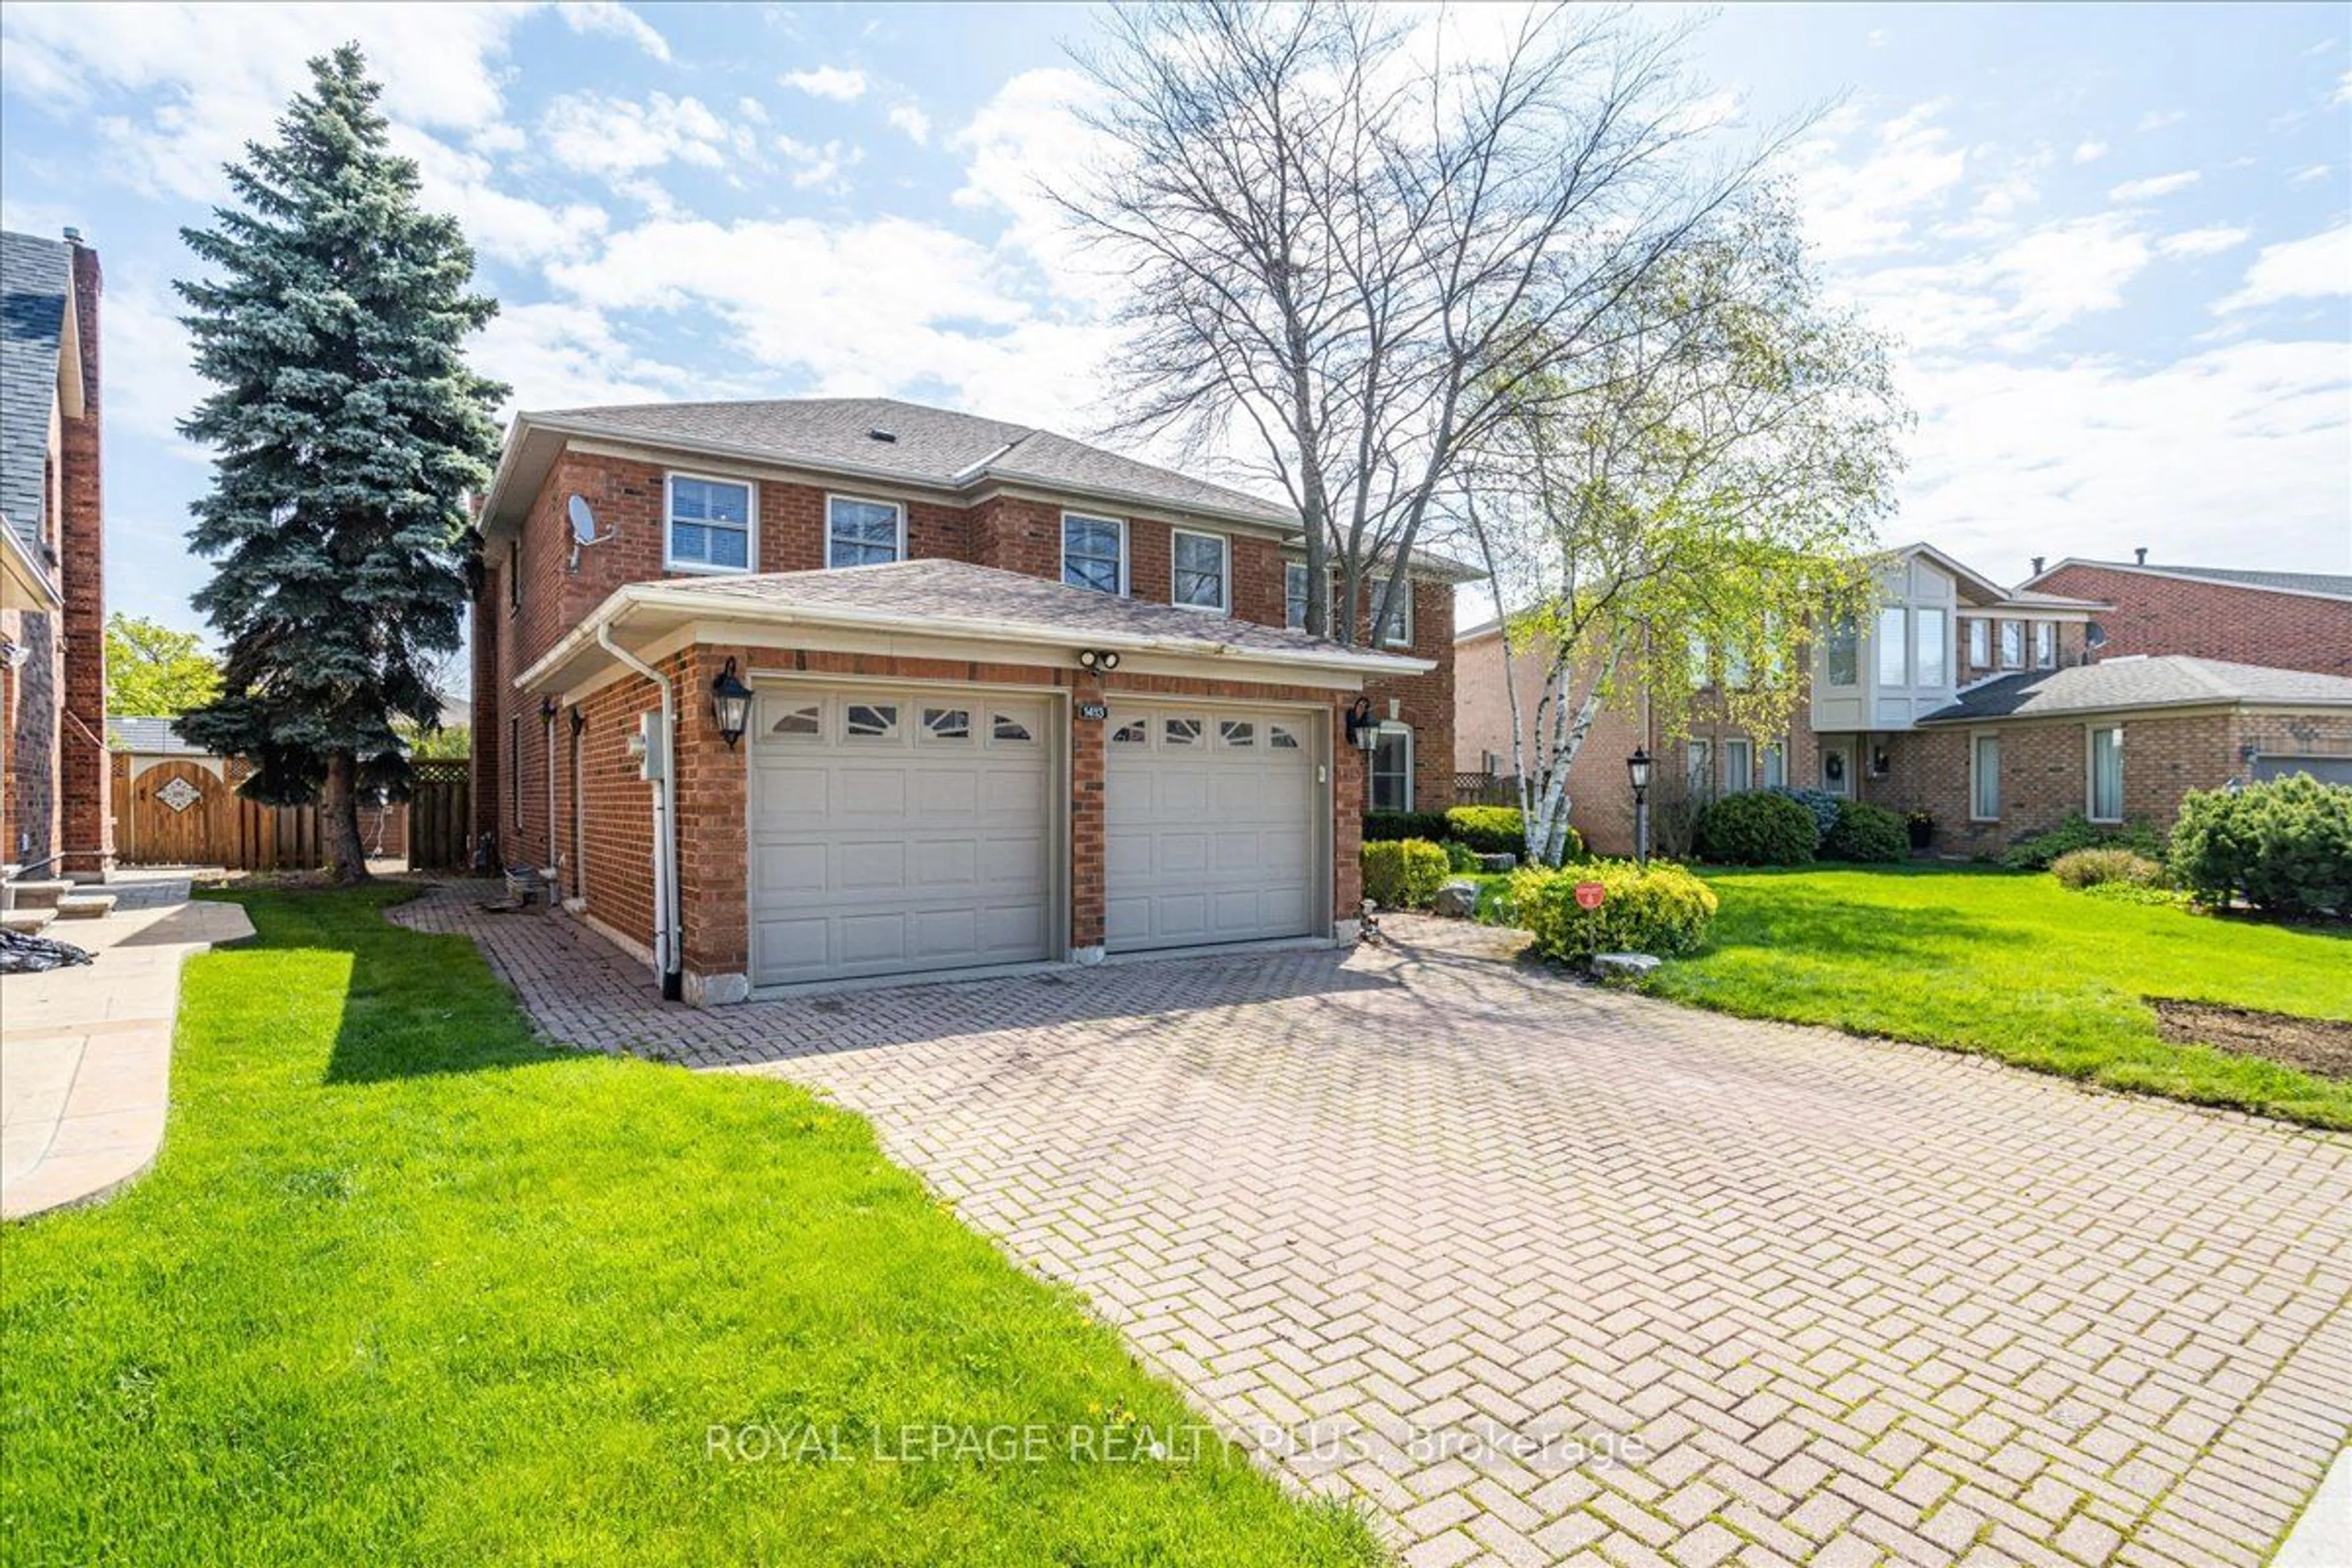 Home with brick exterior material for 1413 Thistledown Rd, Oakville Ontario L6M 1Y4